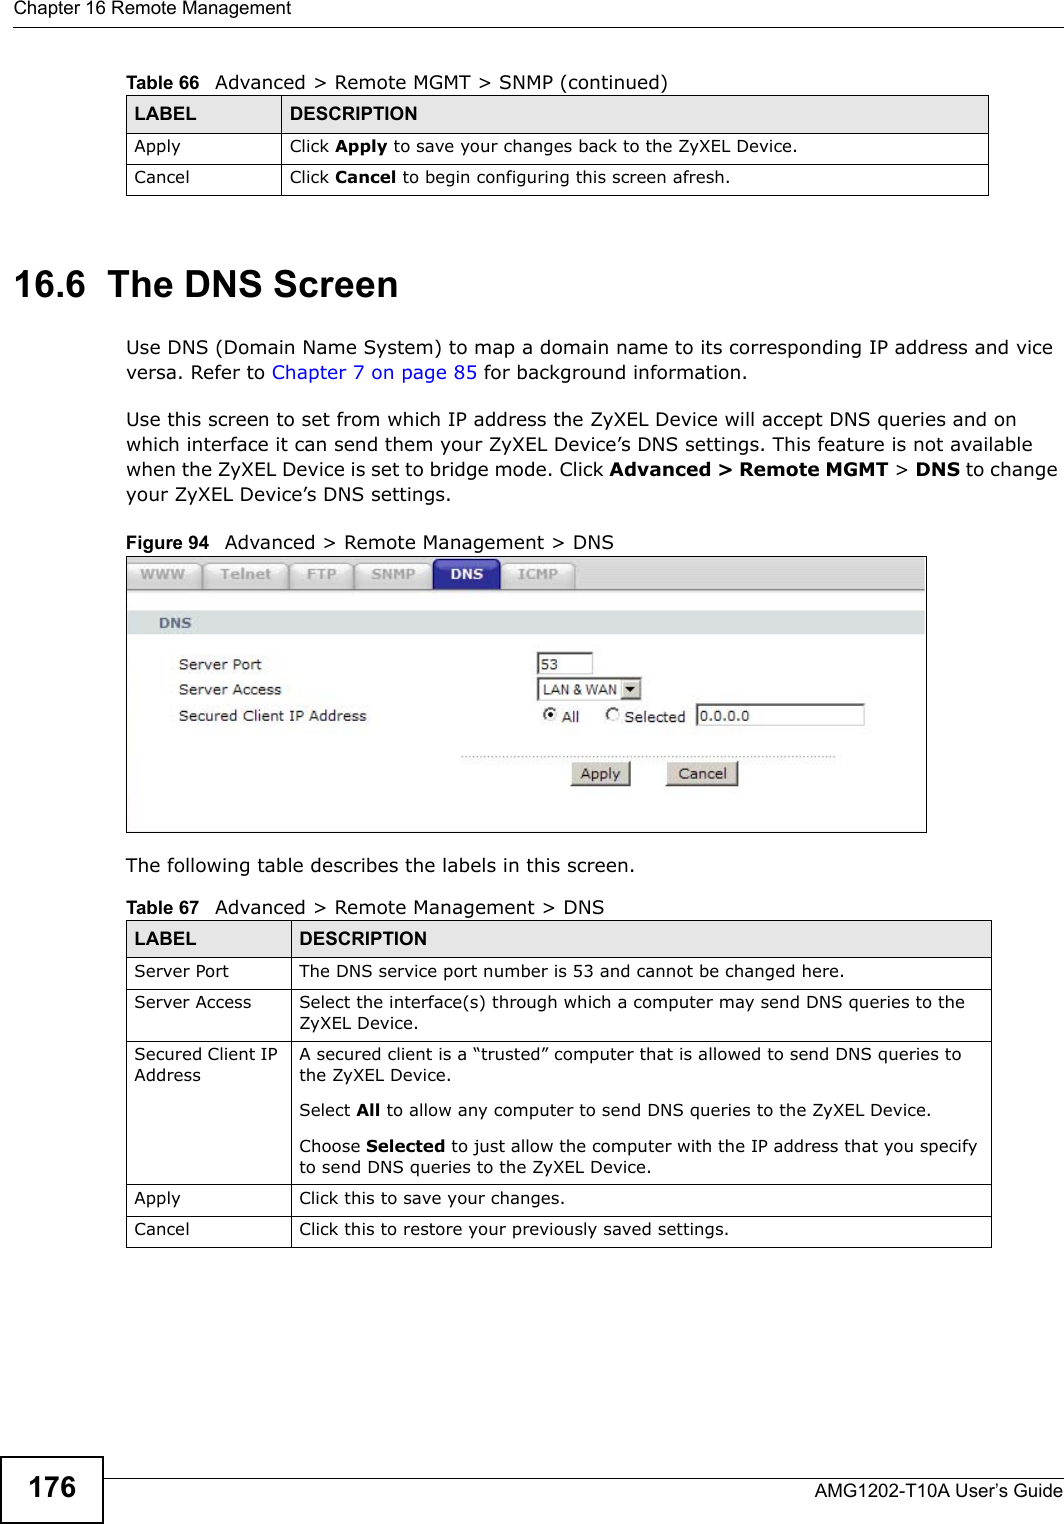 Chapter 16 Remote ManagementAMG1202-T10A User’s Guide17616.6  The DNS Screen Use DNS (Domain Name System) to map a domain name to its corresponding IP address and vice versa. Refer to Chapter 7 on page 85 for background information. Use this screen to set from which IP address the ZyXEL Device will accept DNS queries and on which interface it can send them your ZyXEL Device’s DNS settings. This feature is not available when the ZyXEL Device is set to bridge mode. Click Advanced &gt; Remote MGMT &gt; DNS to change your ZyXEL Device’s DNS settings.Figure 94   Advanced &gt; Remote Management &gt; DNSThe following table describes the labels in this screen.Apply Click Apply to save your changes back to the ZyXEL Device. Cancel Click Cancel to begin configuring this screen afresh.Table 66   Advanced &gt; Remote MGMT &gt; SNMP (continued)LABEL DESCRIPTIONTable 67   Advanced &gt; Remote Management &gt; DNSLABEL DESCRIPTIONServer Port The DNS service port number is 53 and cannot be changed here.Server Access  Select the interface(s) through which a computer may send DNS queries to the ZyXEL Device.Secured Client IP AddressA secured client is a “trusted” computer that is allowed to send DNS queries to the ZyXEL Device.Select All to allow any computer to send DNS queries to the ZyXEL Device.Choose Selected to just allow the computer with the IP address that you specify to send DNS queries to the ZyXEL Device.Apply Click this to save your changes.Cancel Click this to restore your previously saved settings.